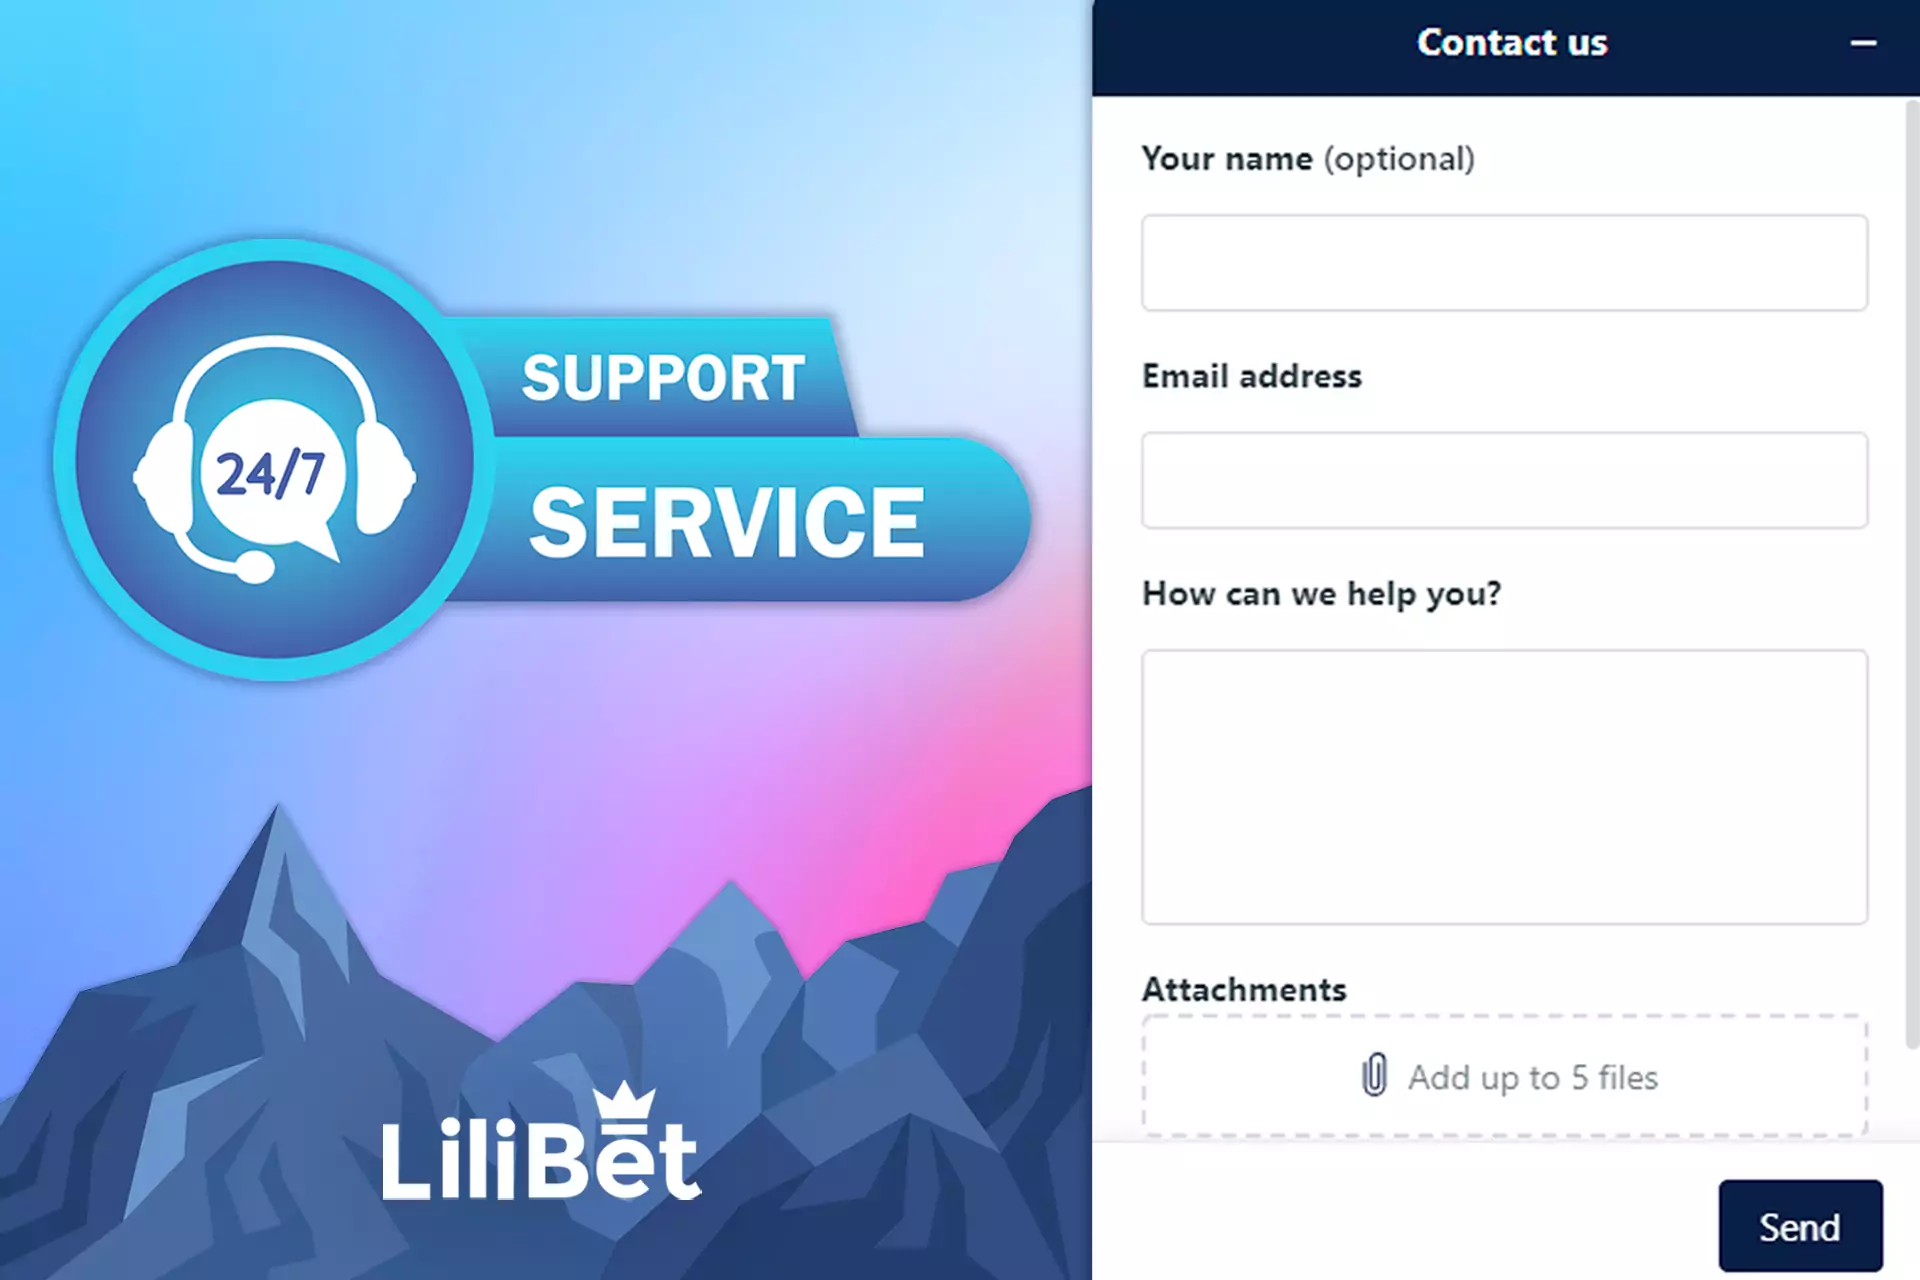 Ask the support service in a chat or via email if you need help betting on Lilibet.